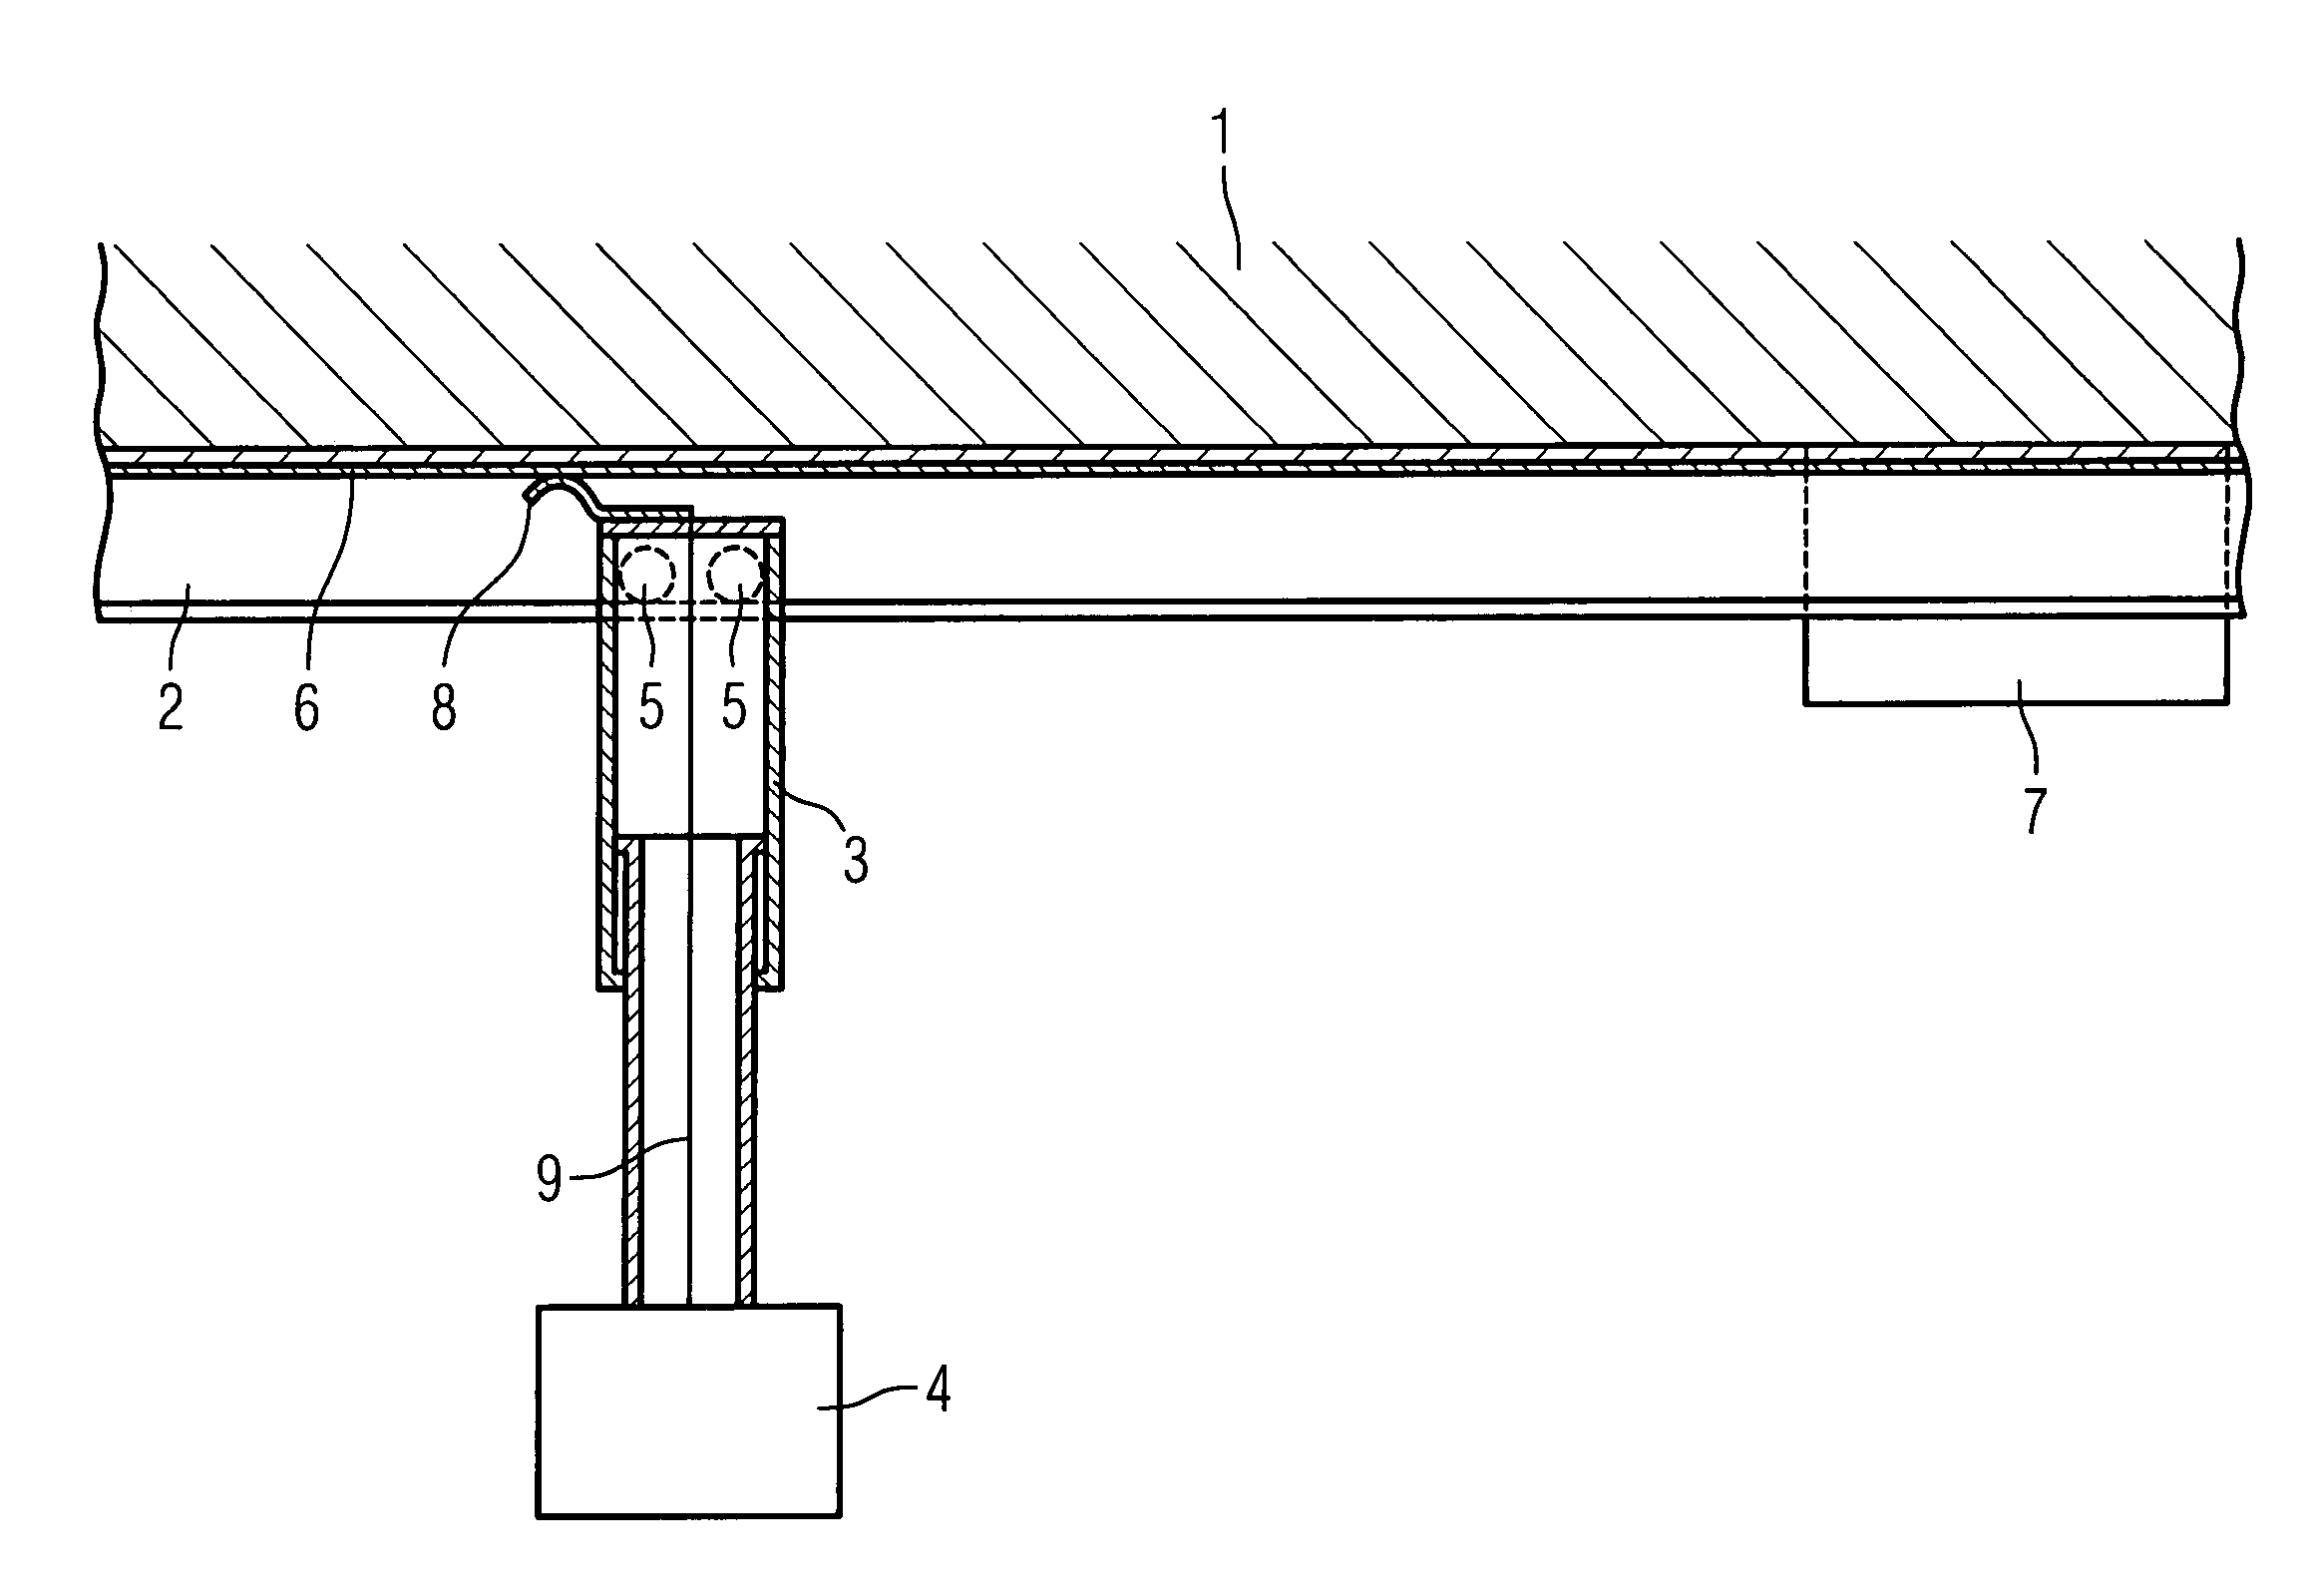 X-ray device with an x-ray source fixed to a ceiling stand